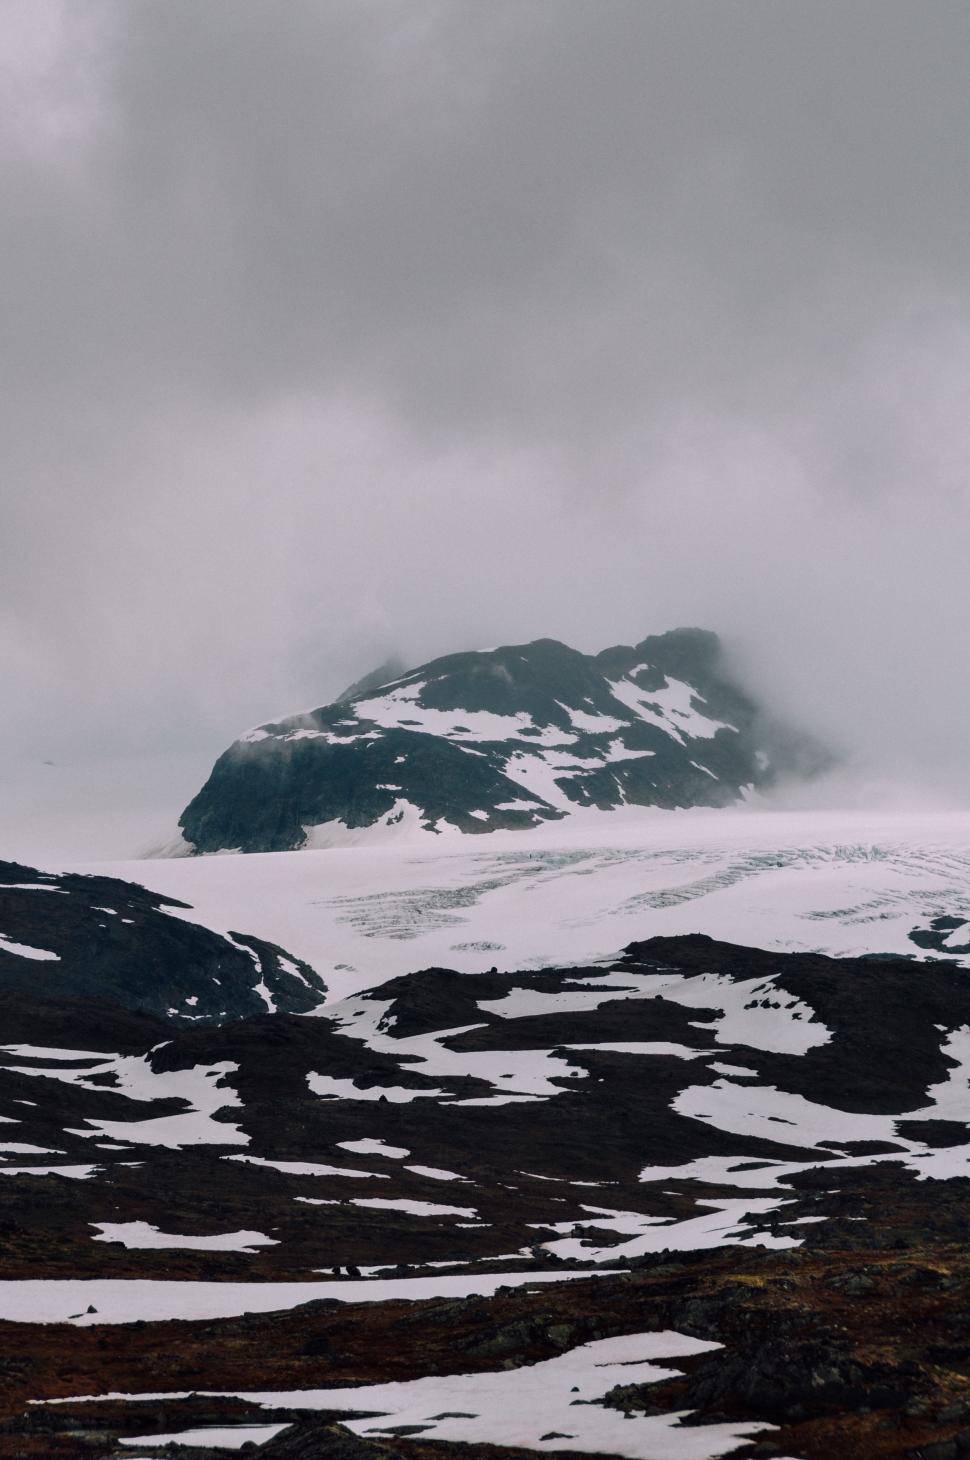 Free Image of Snow-Covered Mountain Amidst Clouds on Cloudy Day 